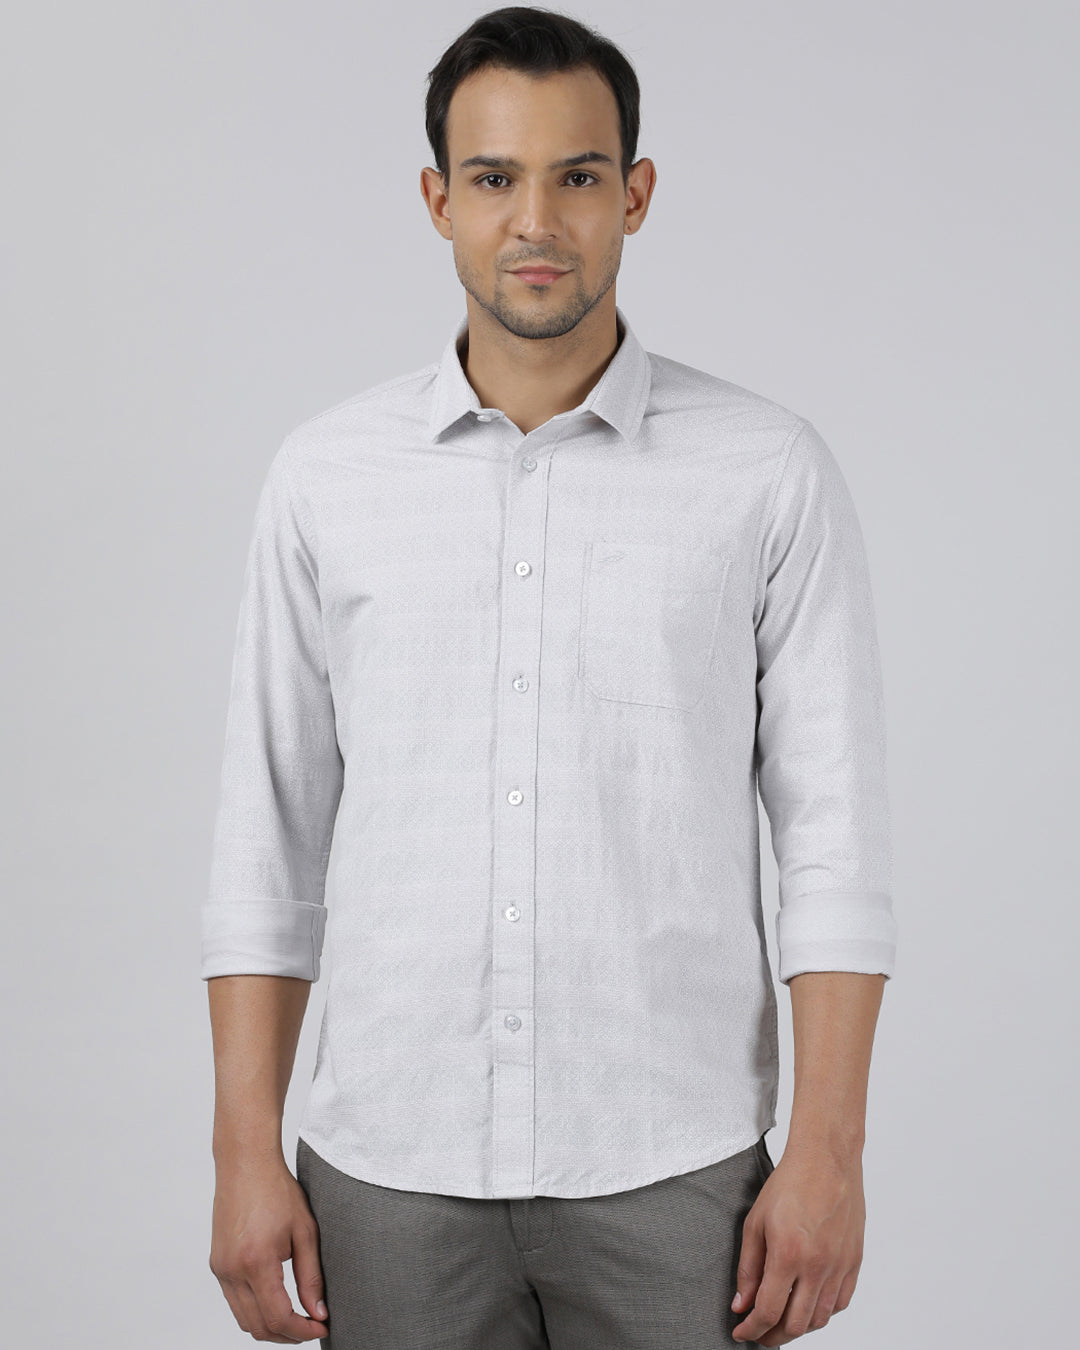 Casual Grey Full Sleeve Regular Fit Print Shirt with Collar for Men